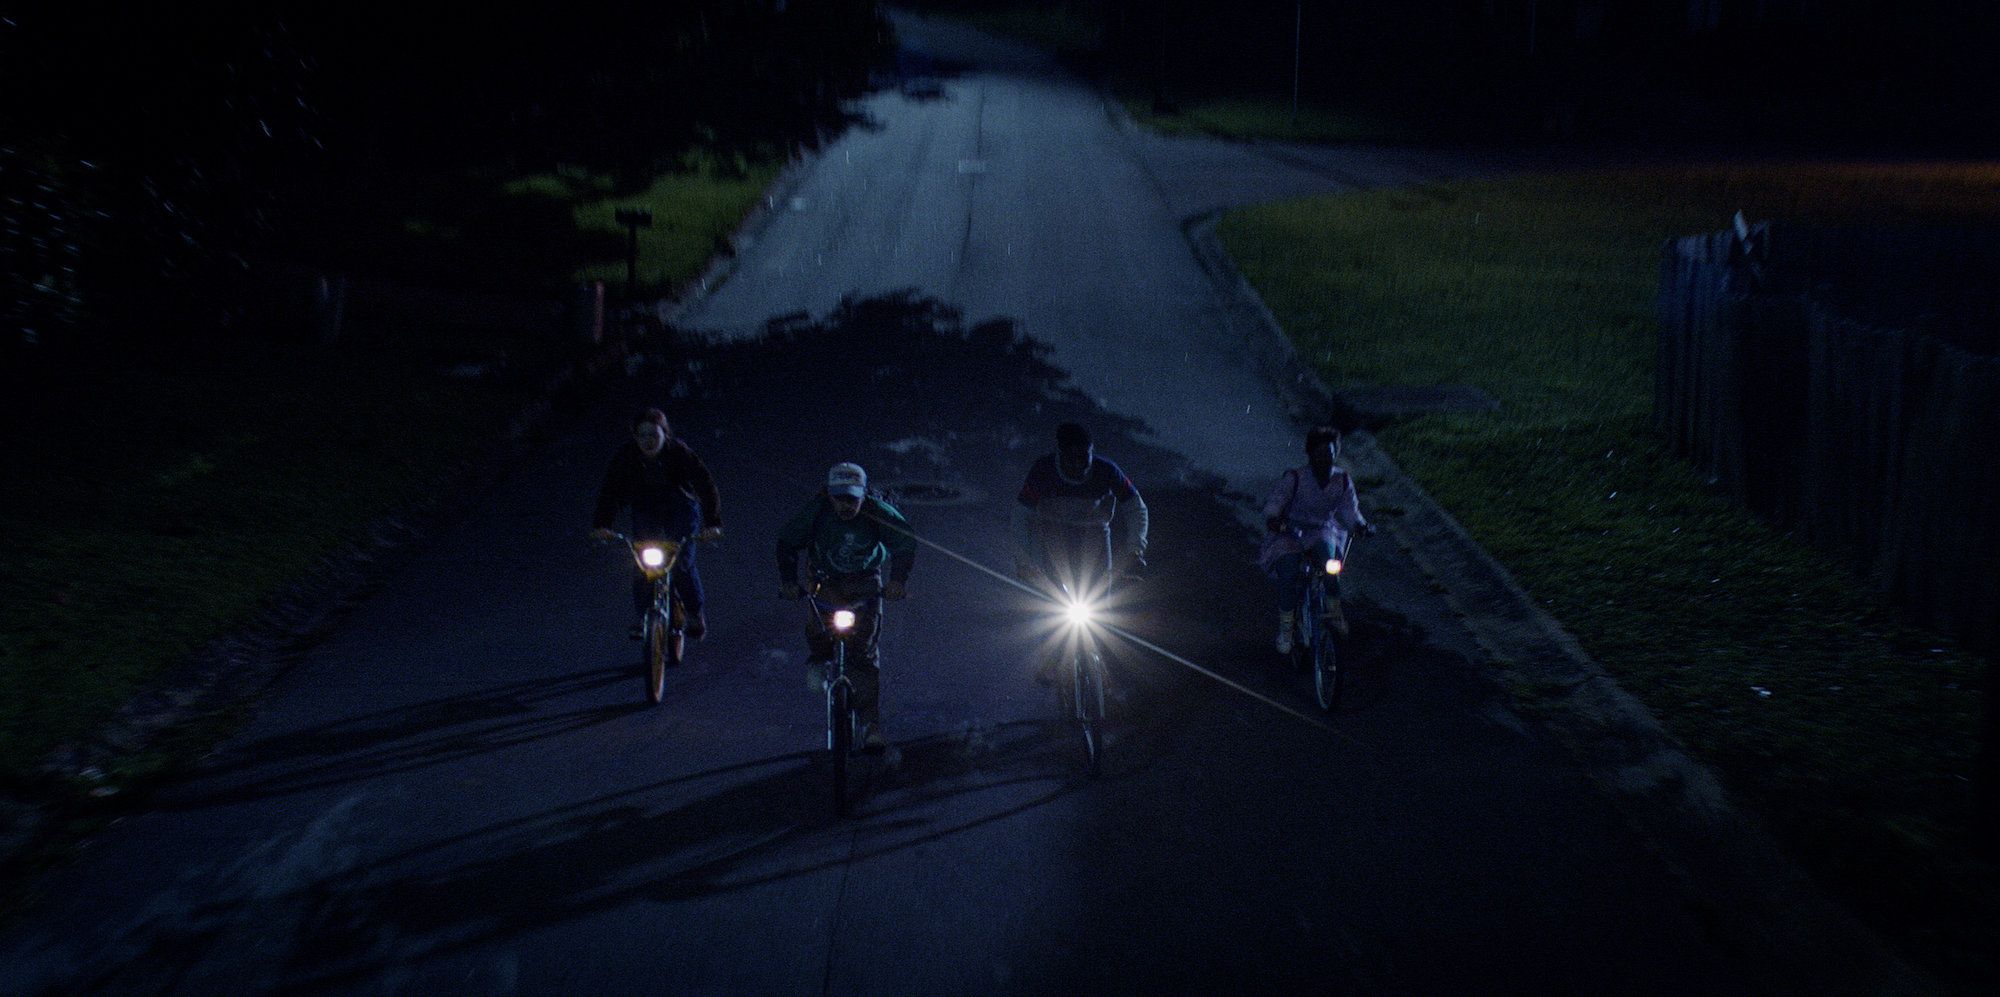 'Stranger Things' cast ride their bikes at night